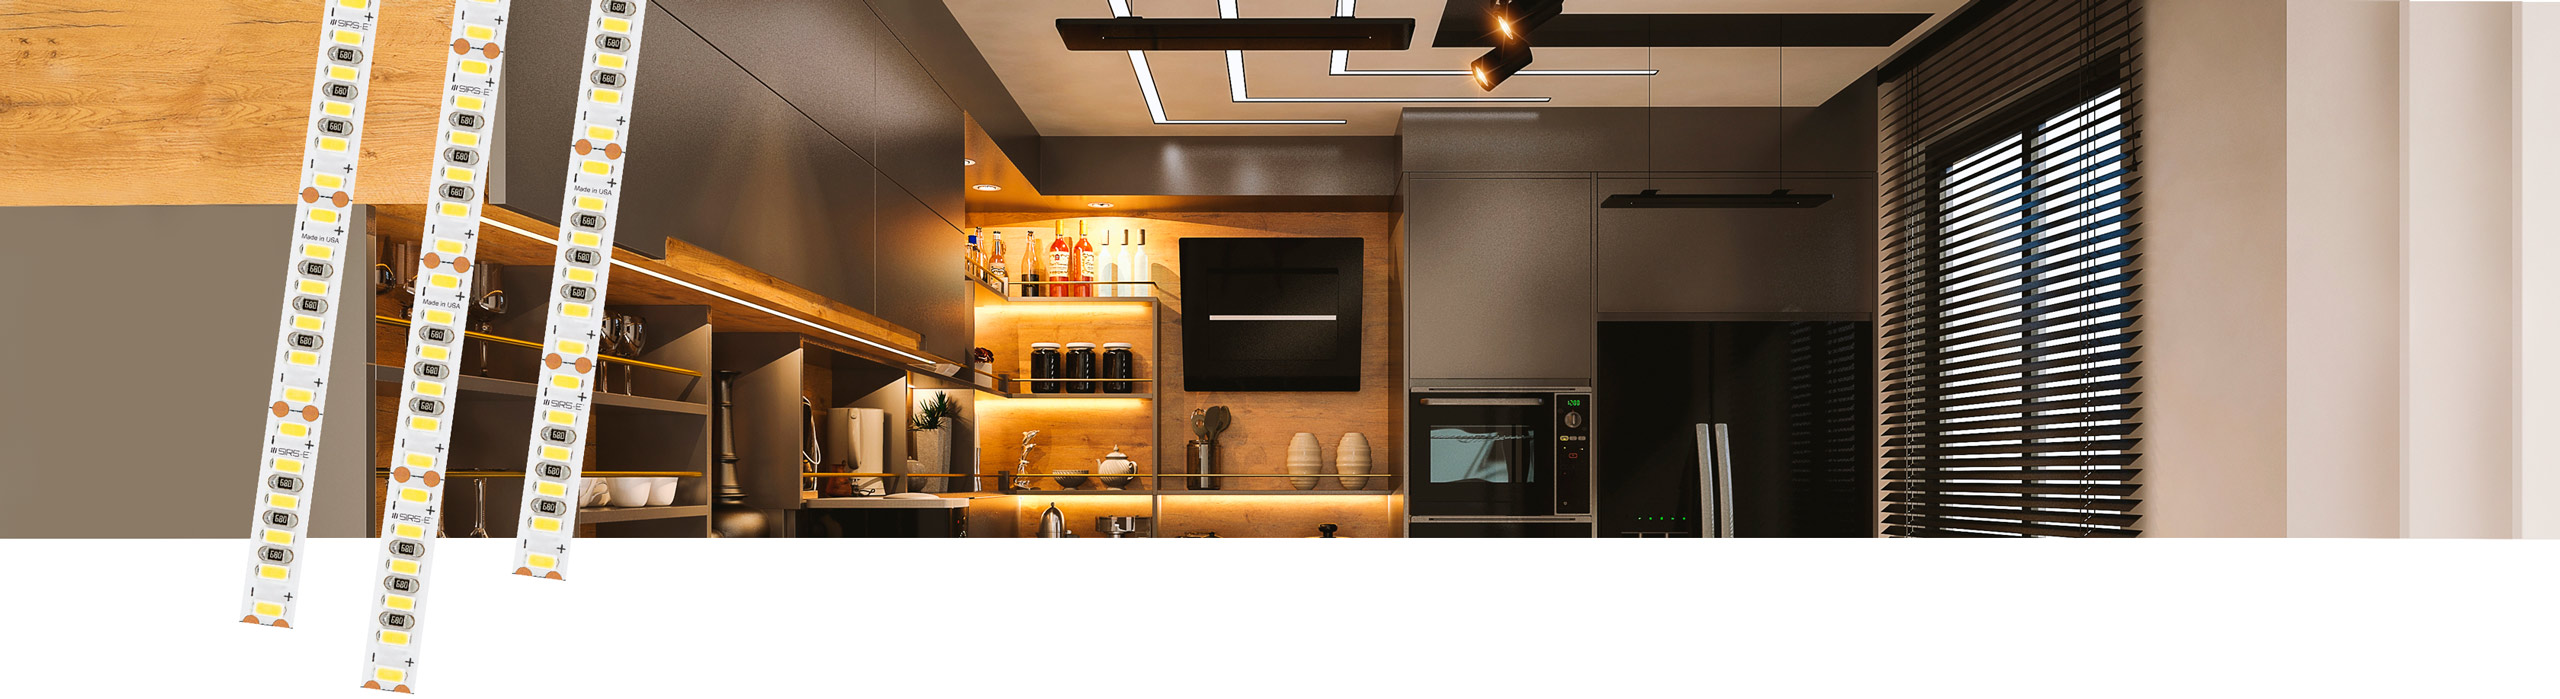 Kitchen LED Lighting Appication utilizing SIRS-E AcuVivid-Fit